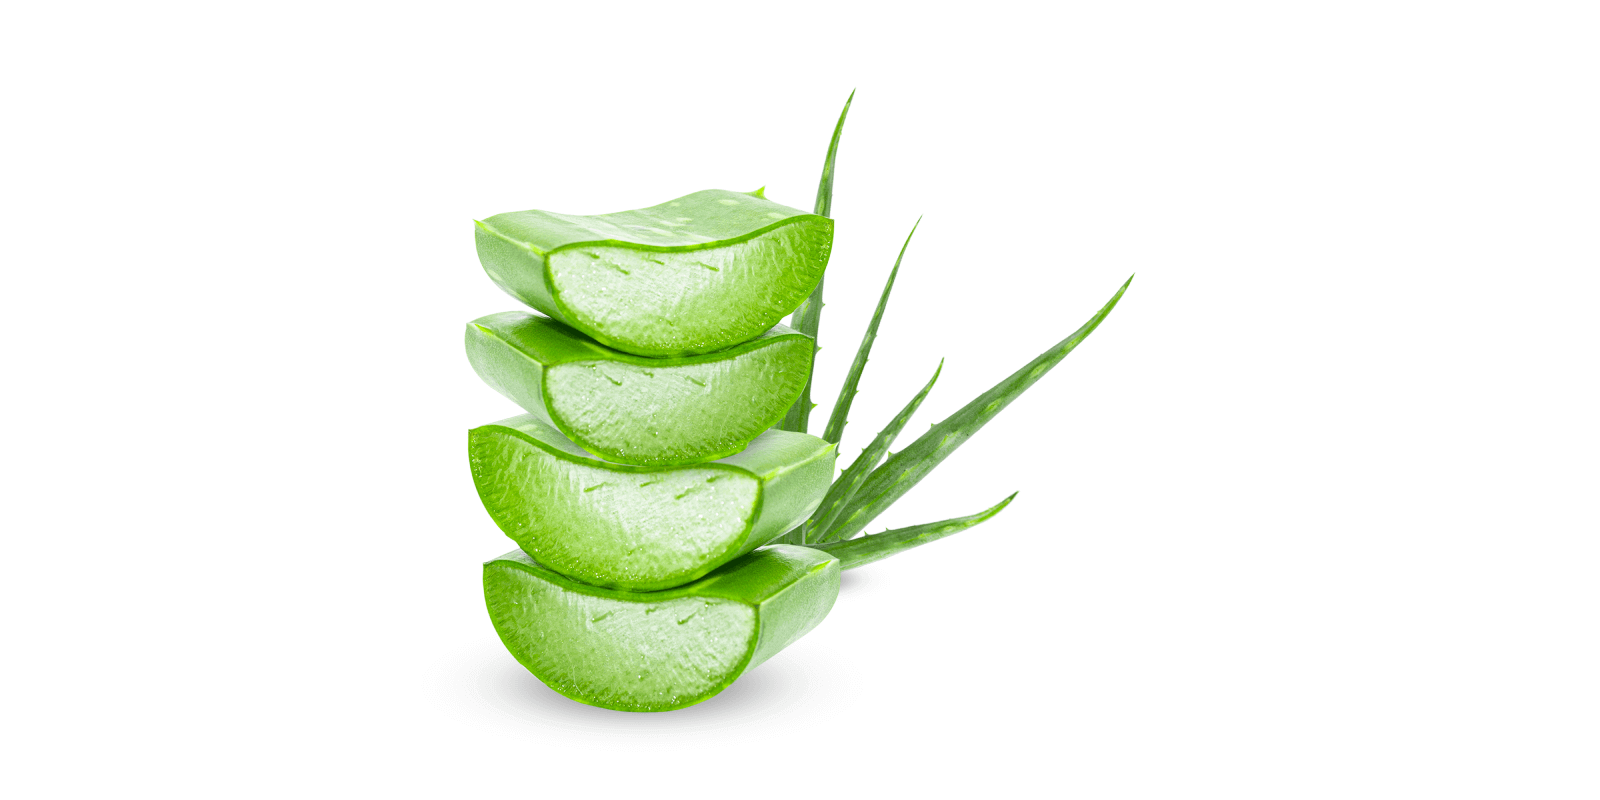 Aloe Vera Guide: Benefits, Side Effects, and More